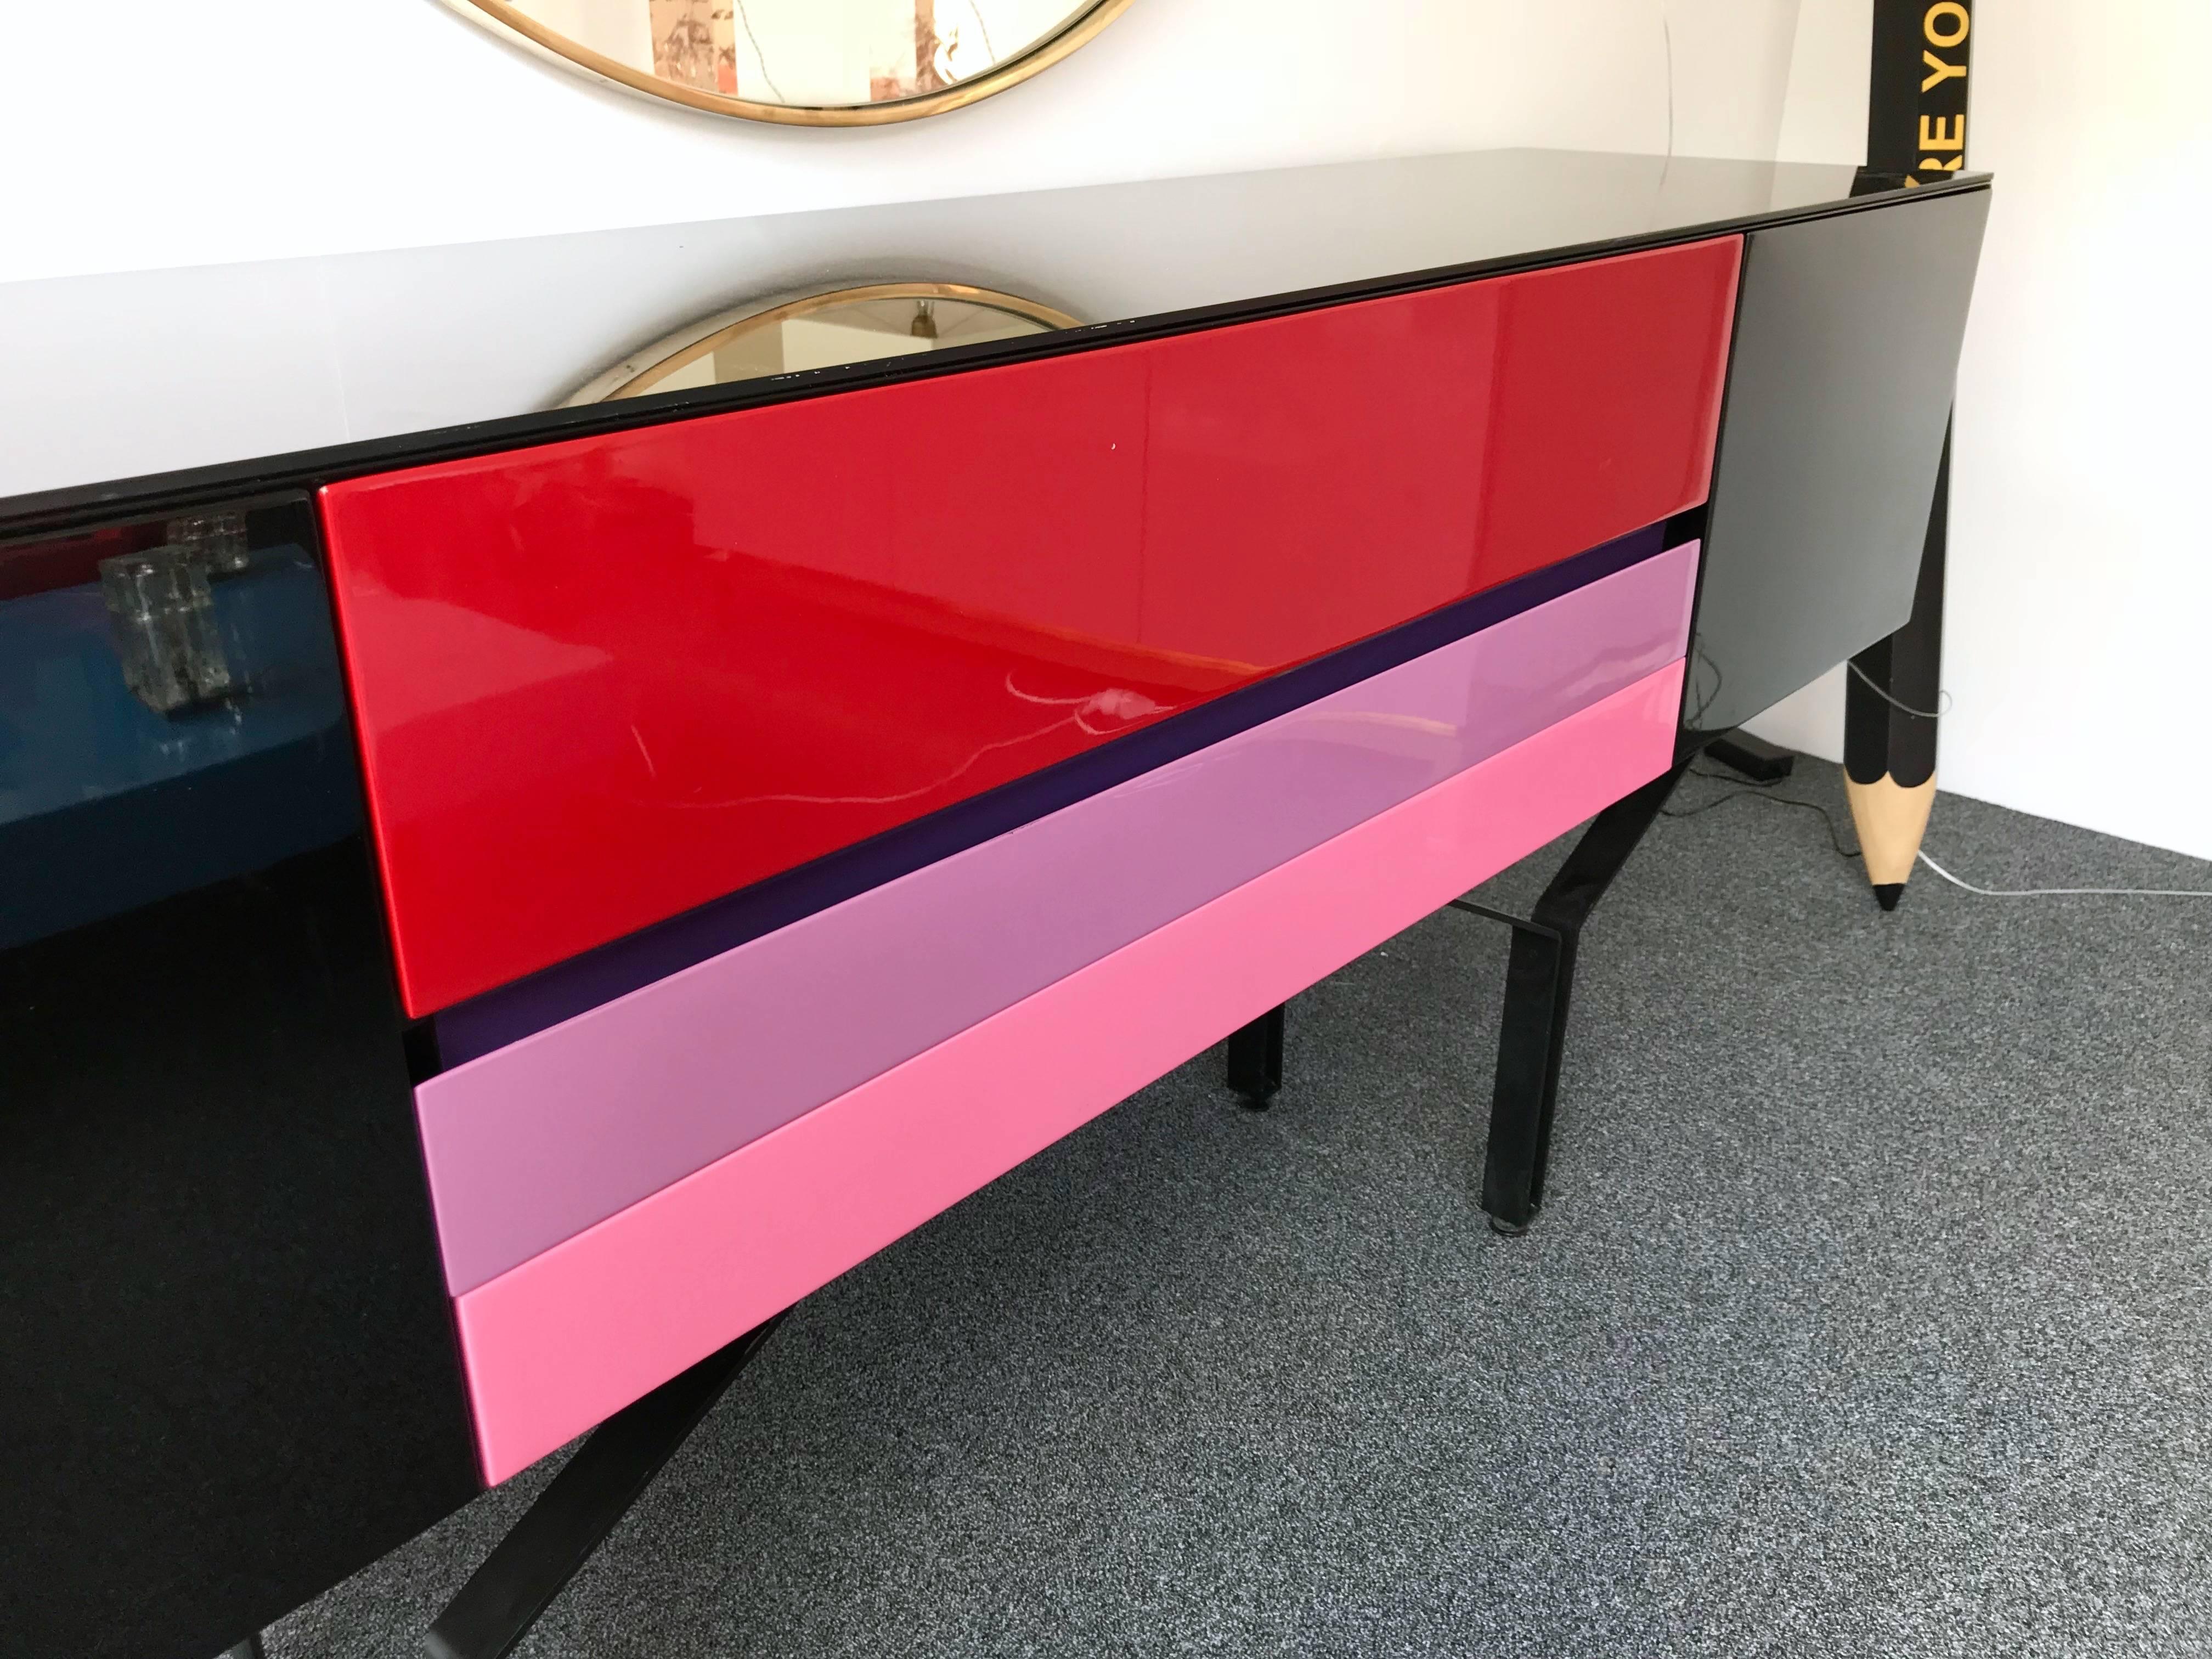 Sideboard buffet credenza or console table attributed to the Italian editor Acerbis. Three drawers and two doors lacquered red, pink, parma purple light and black. Black opalin top glass. Black metal feet. Same period as Memphis, Archizoom, Giotto